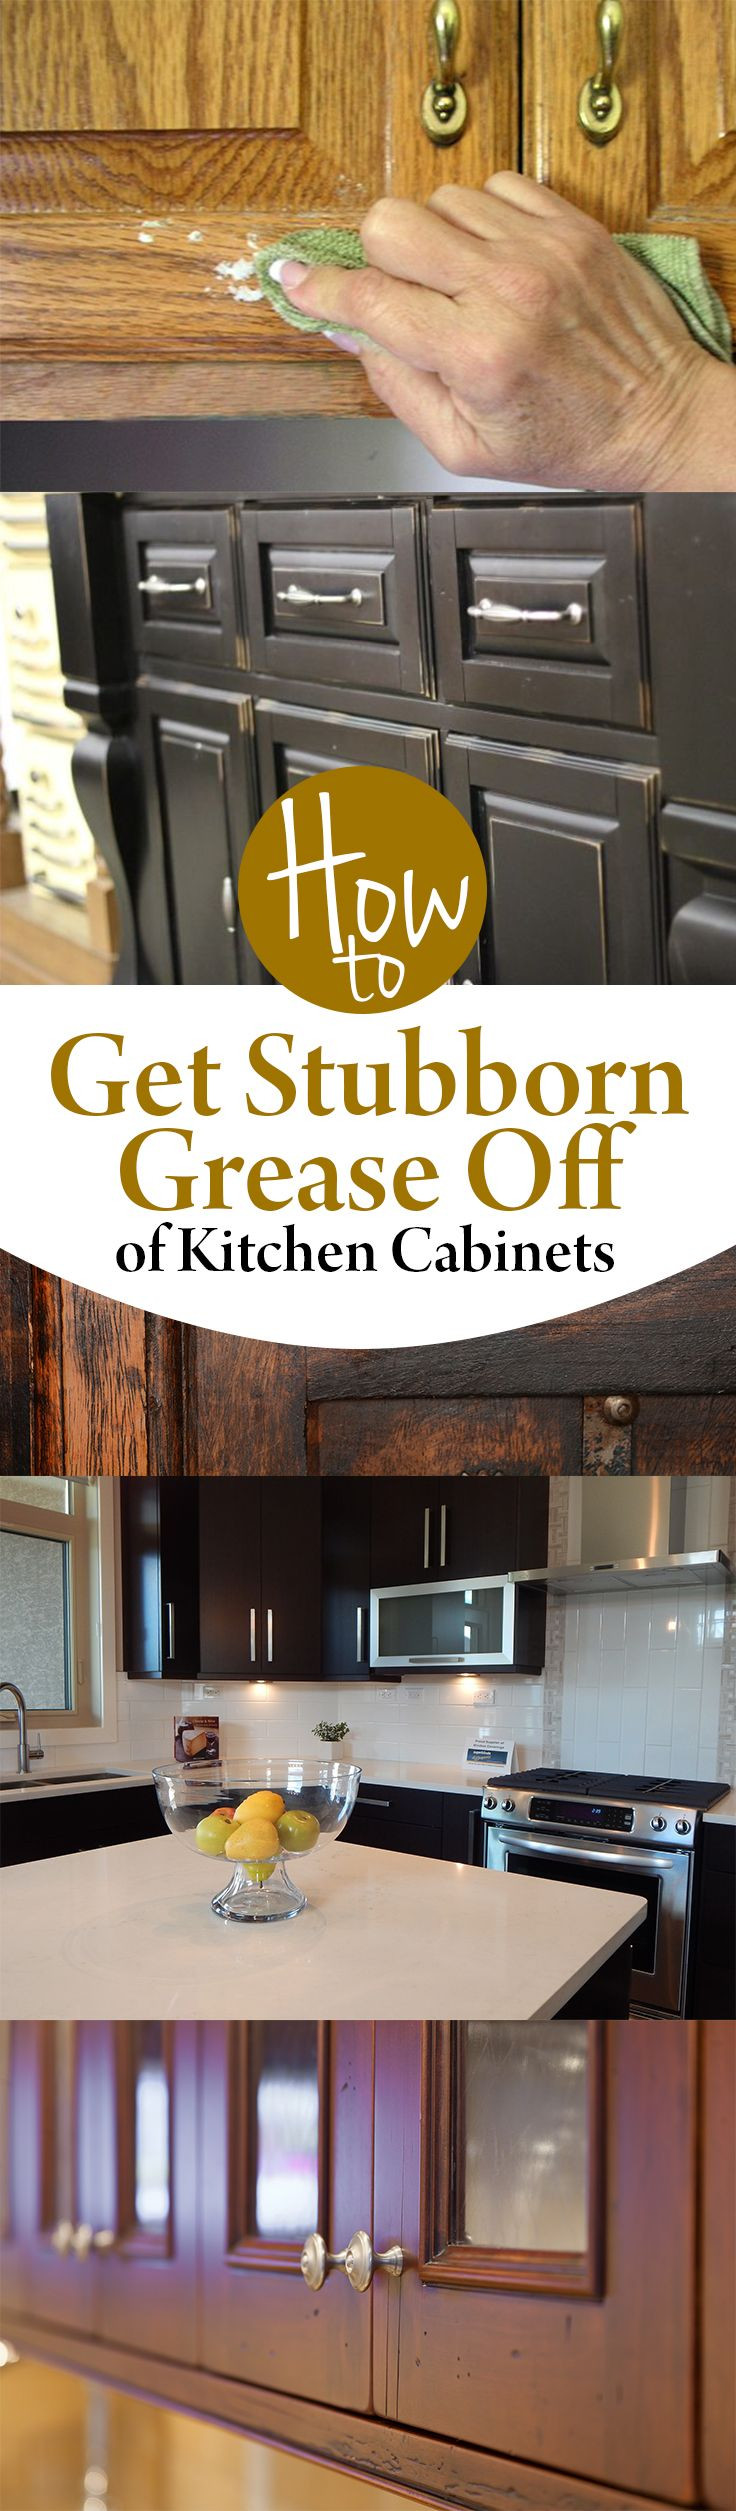 healthsmart hardwood floor steam cleaner of 1765 best home made cleaners household misc images on pinterest with regard to how to get stubborn grease off of kitchen cabinets